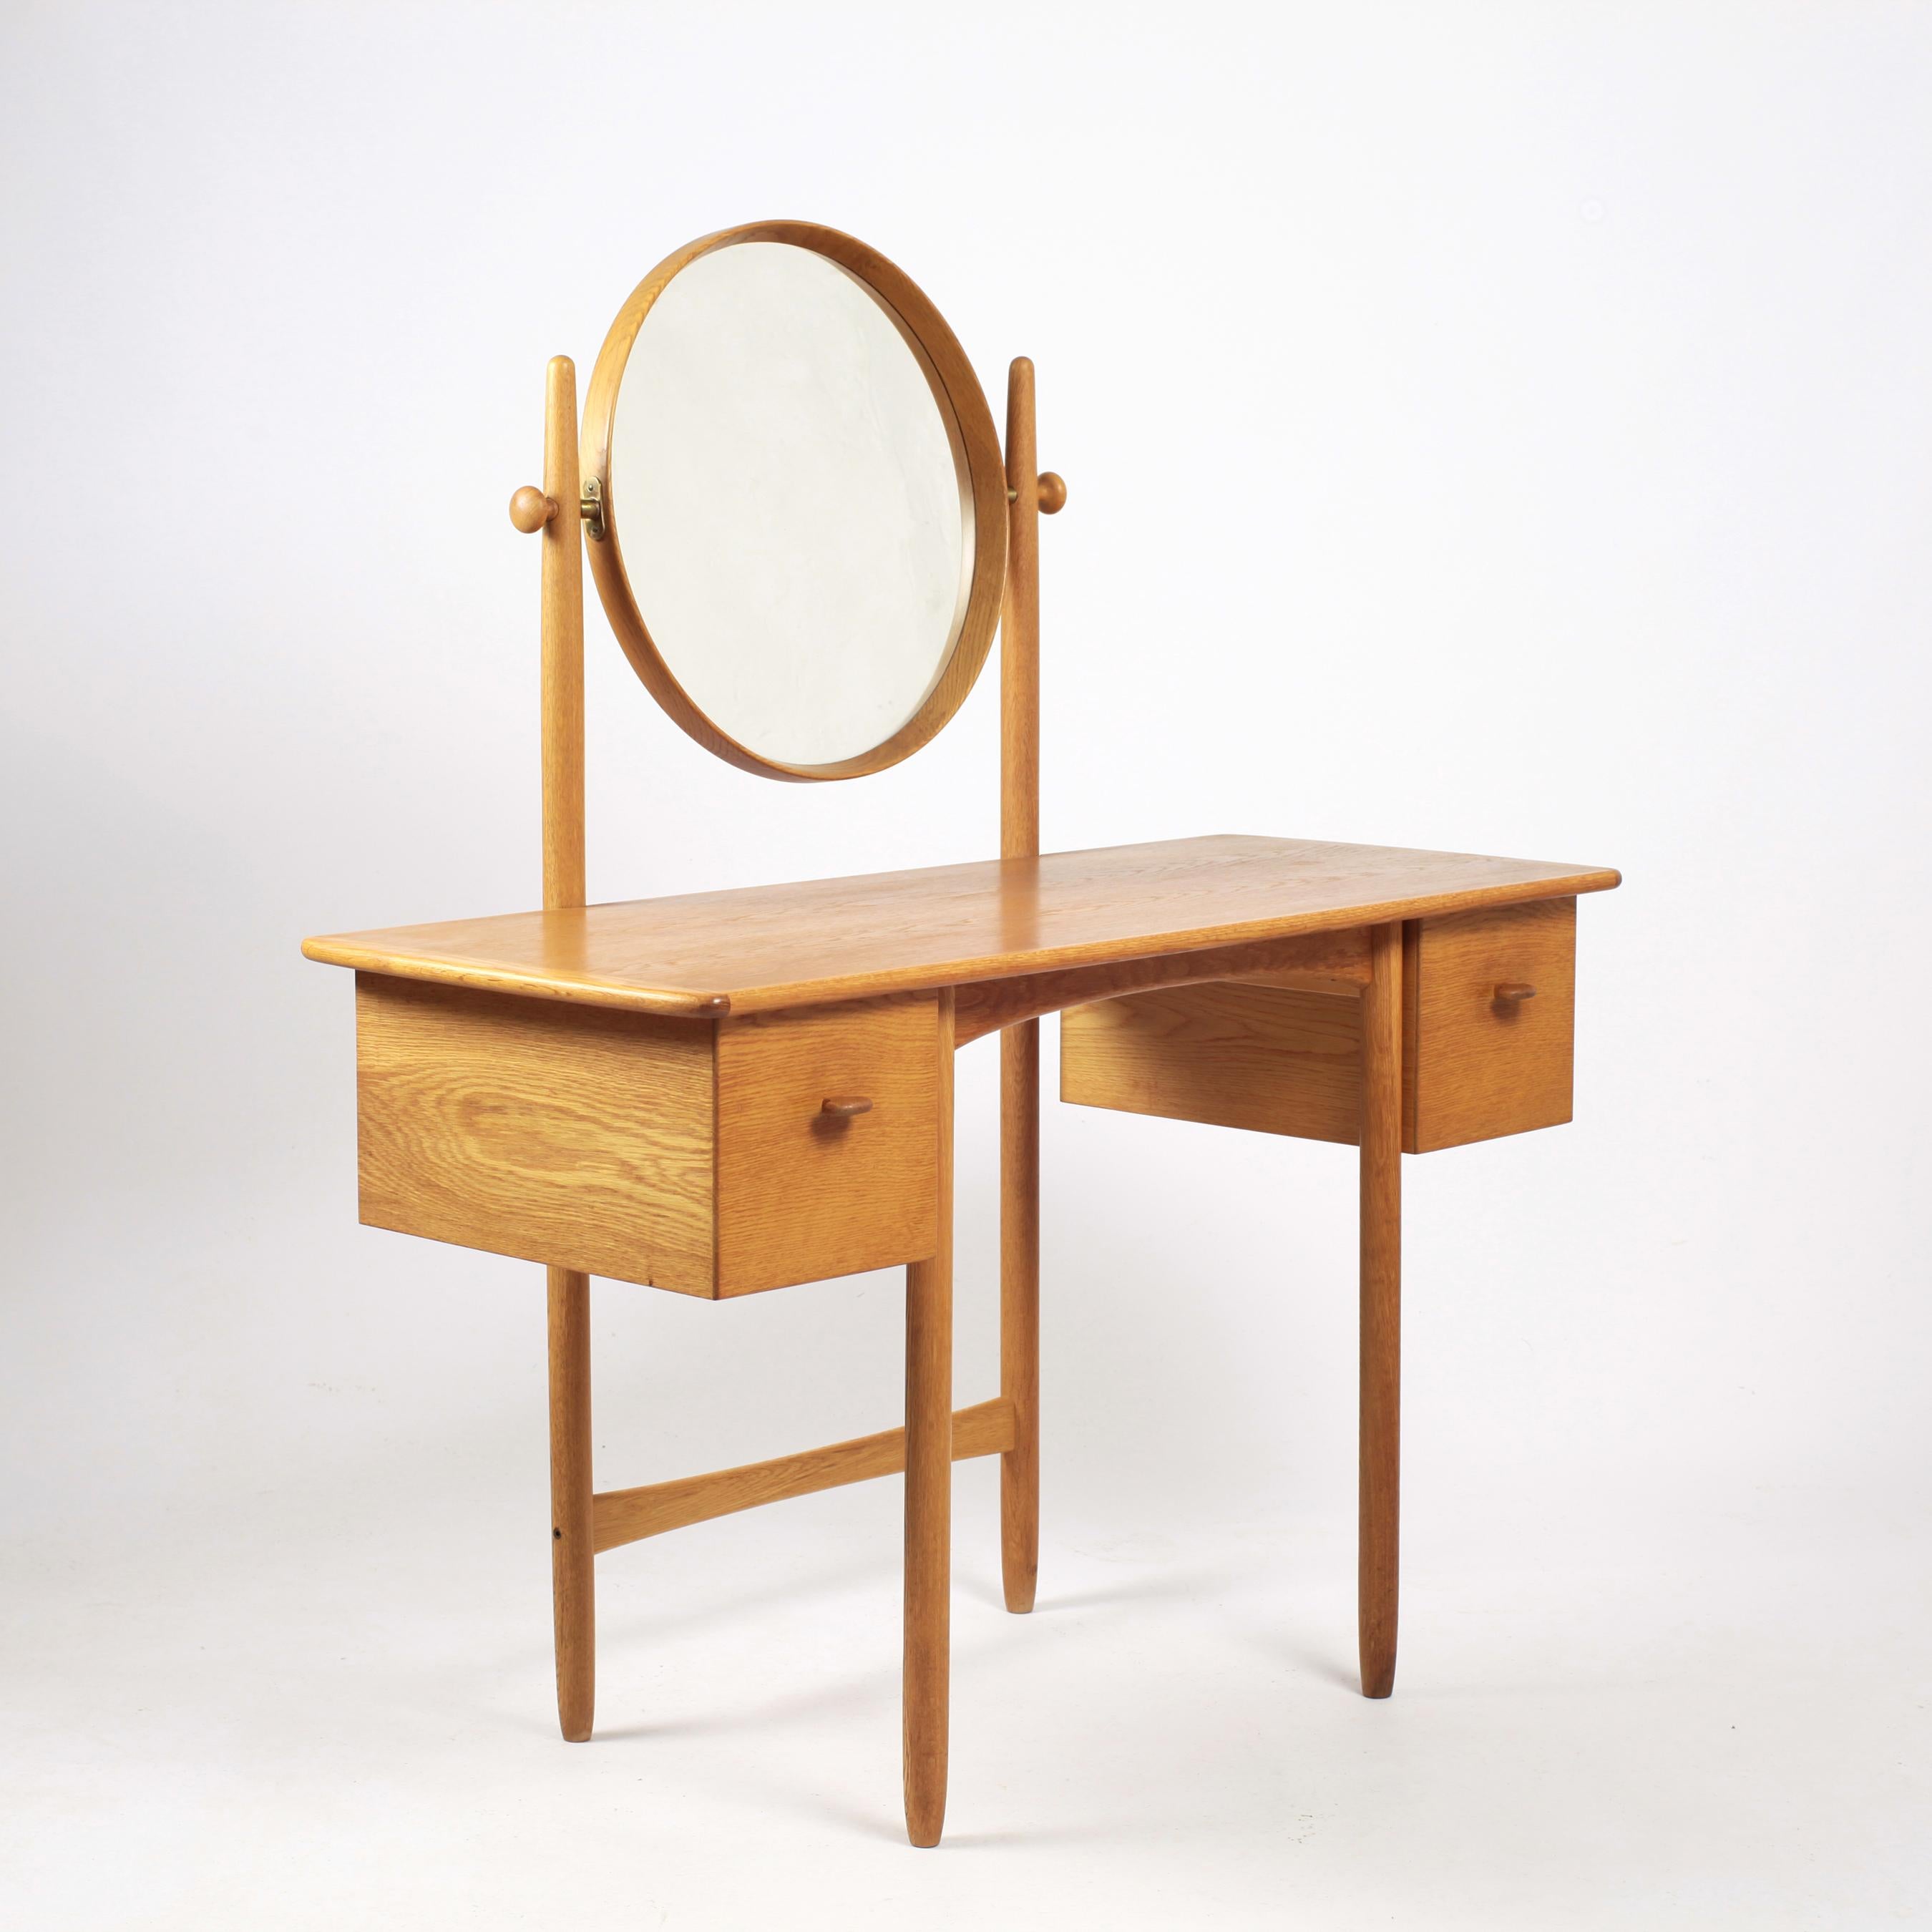 Very chic dressing table by Sven Engström and Gunnar Myrstrand.
Oak, glass and brass details, an original and elegant piece.
Stamped.